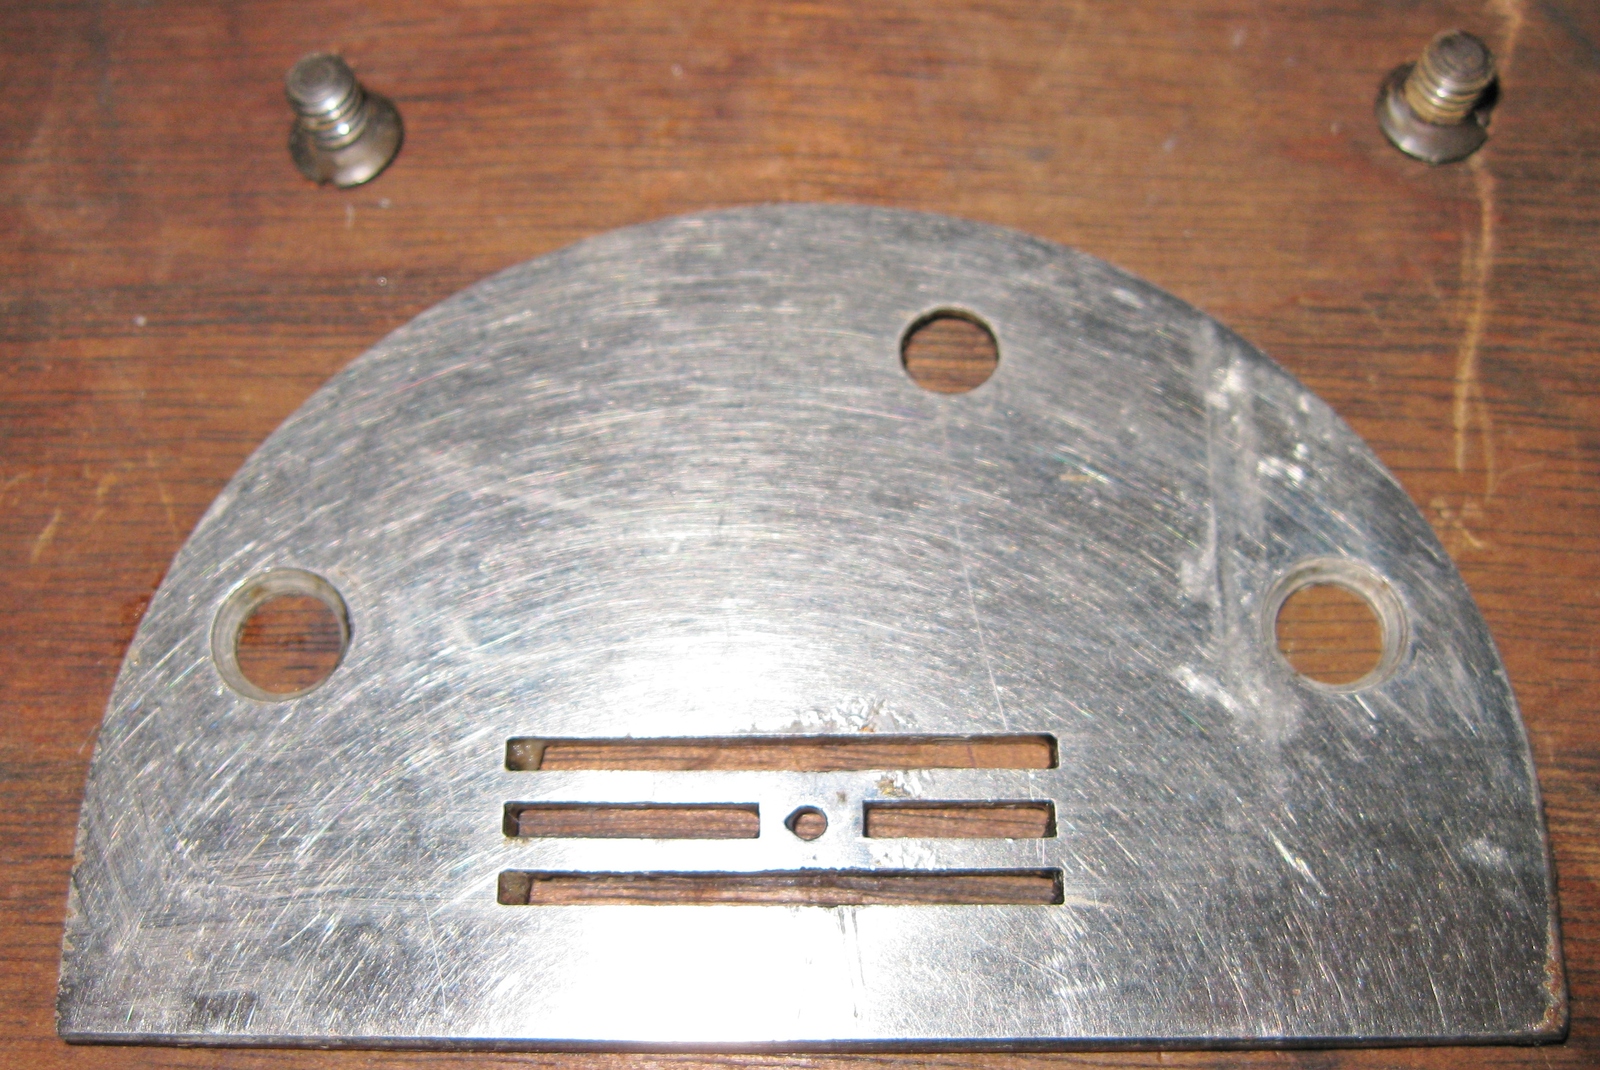 Vintage White Family Rotary Throat Plate w/Mounting Screws - $10.00